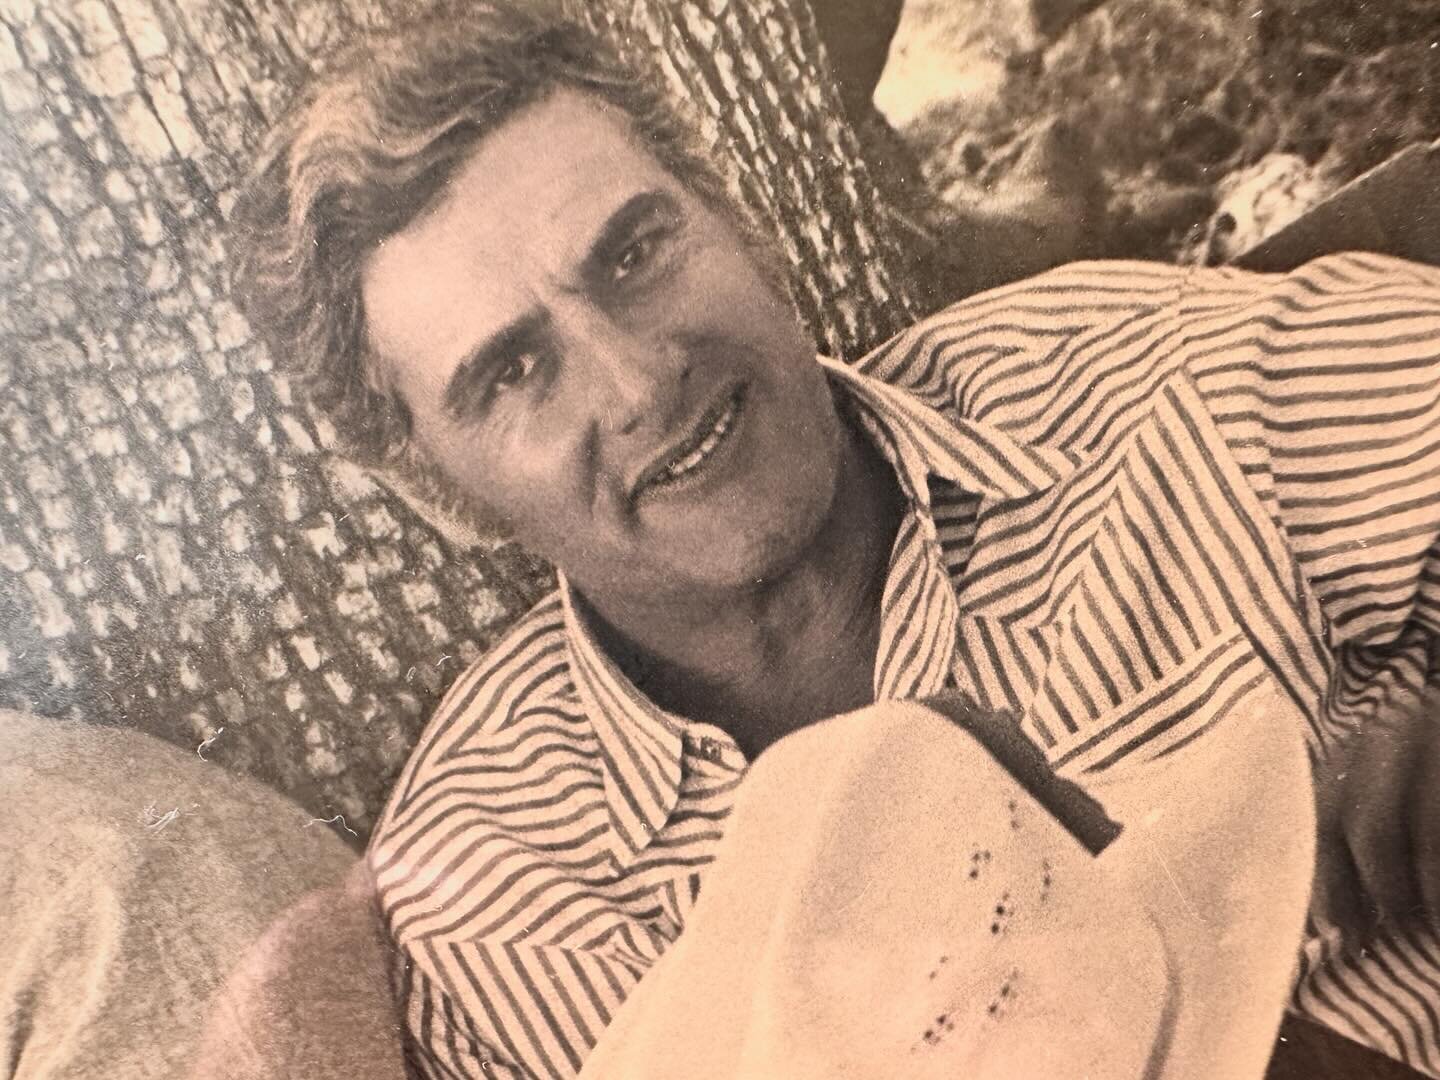 On Saturday March 9th, 2024 my amazing grandfather and lifelong role model said goodbye to his 101 year old body and was welcomed to his new home in the heavens with his many friends that had passed before him.

We love you Gink! Thank you for your 1